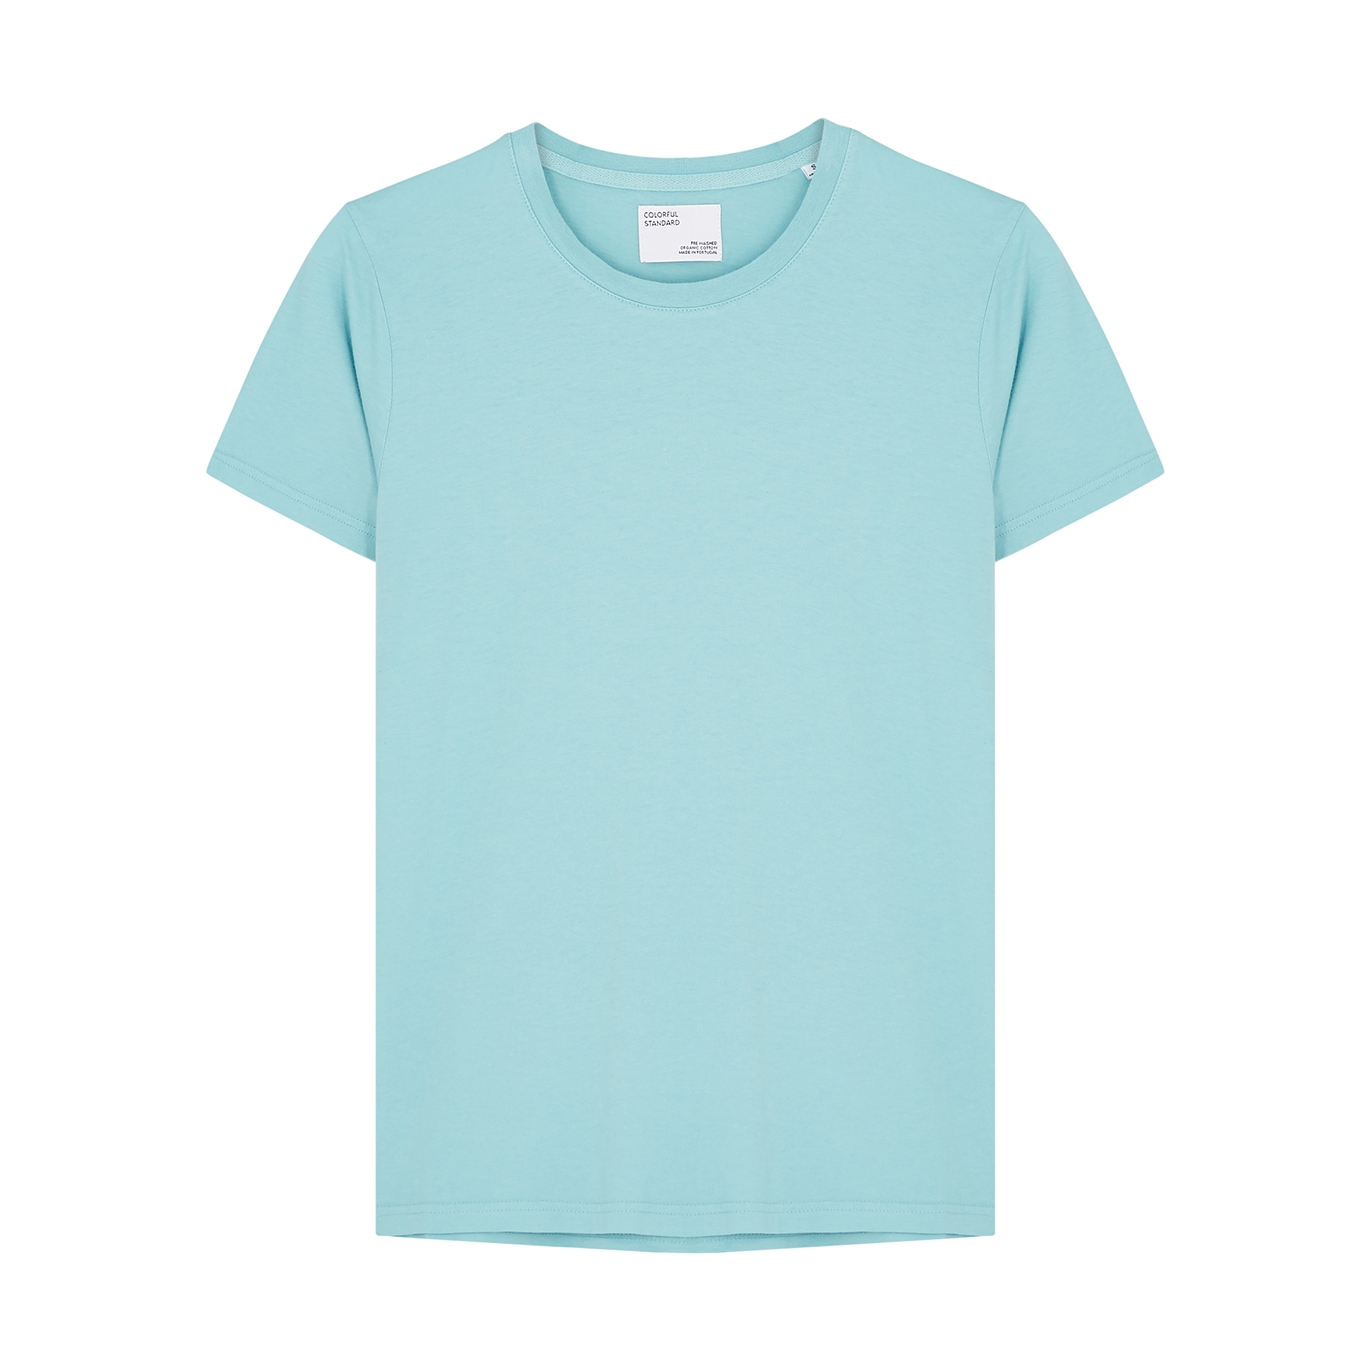 Colorful Standard Turquoise Cotton T-shirt